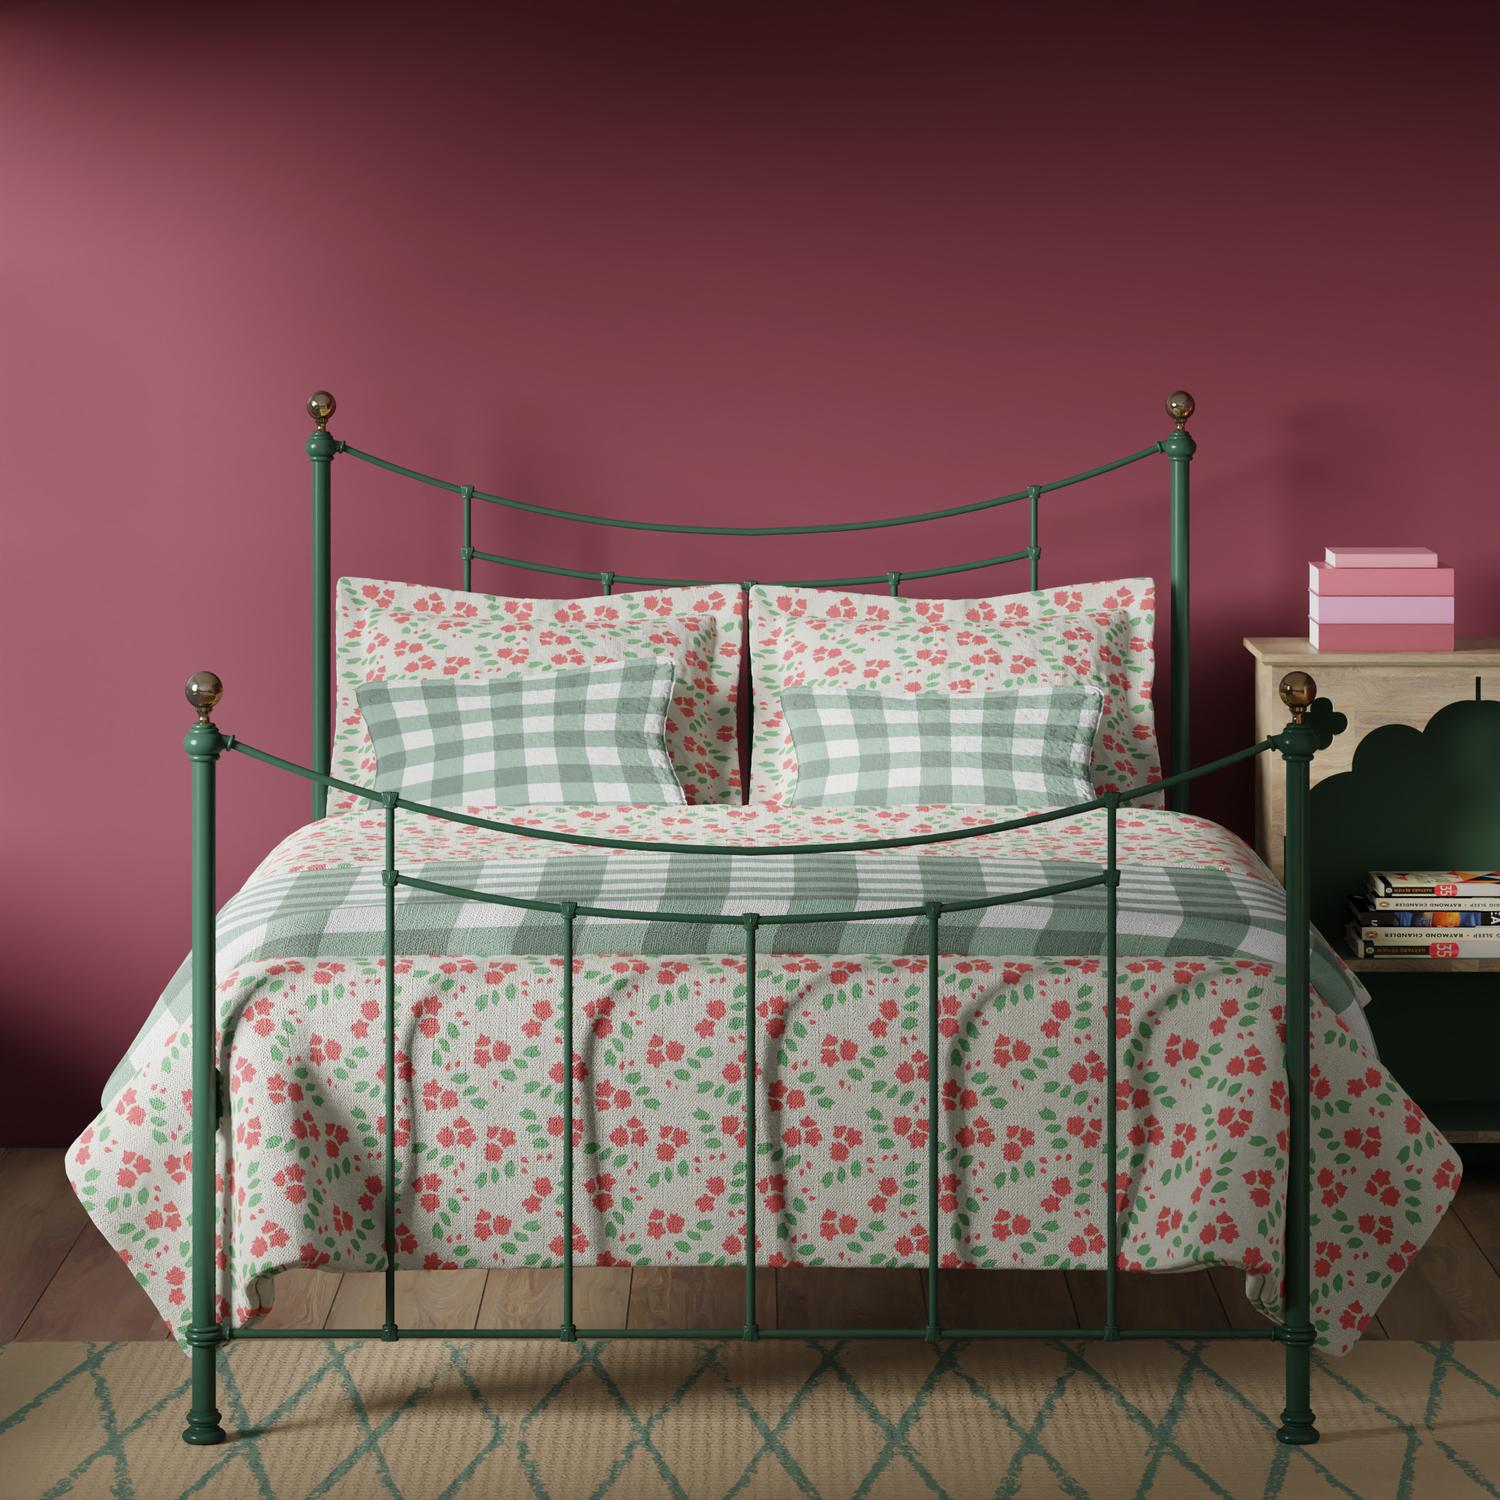 Virginia iron bed - Image pink and green bedroom